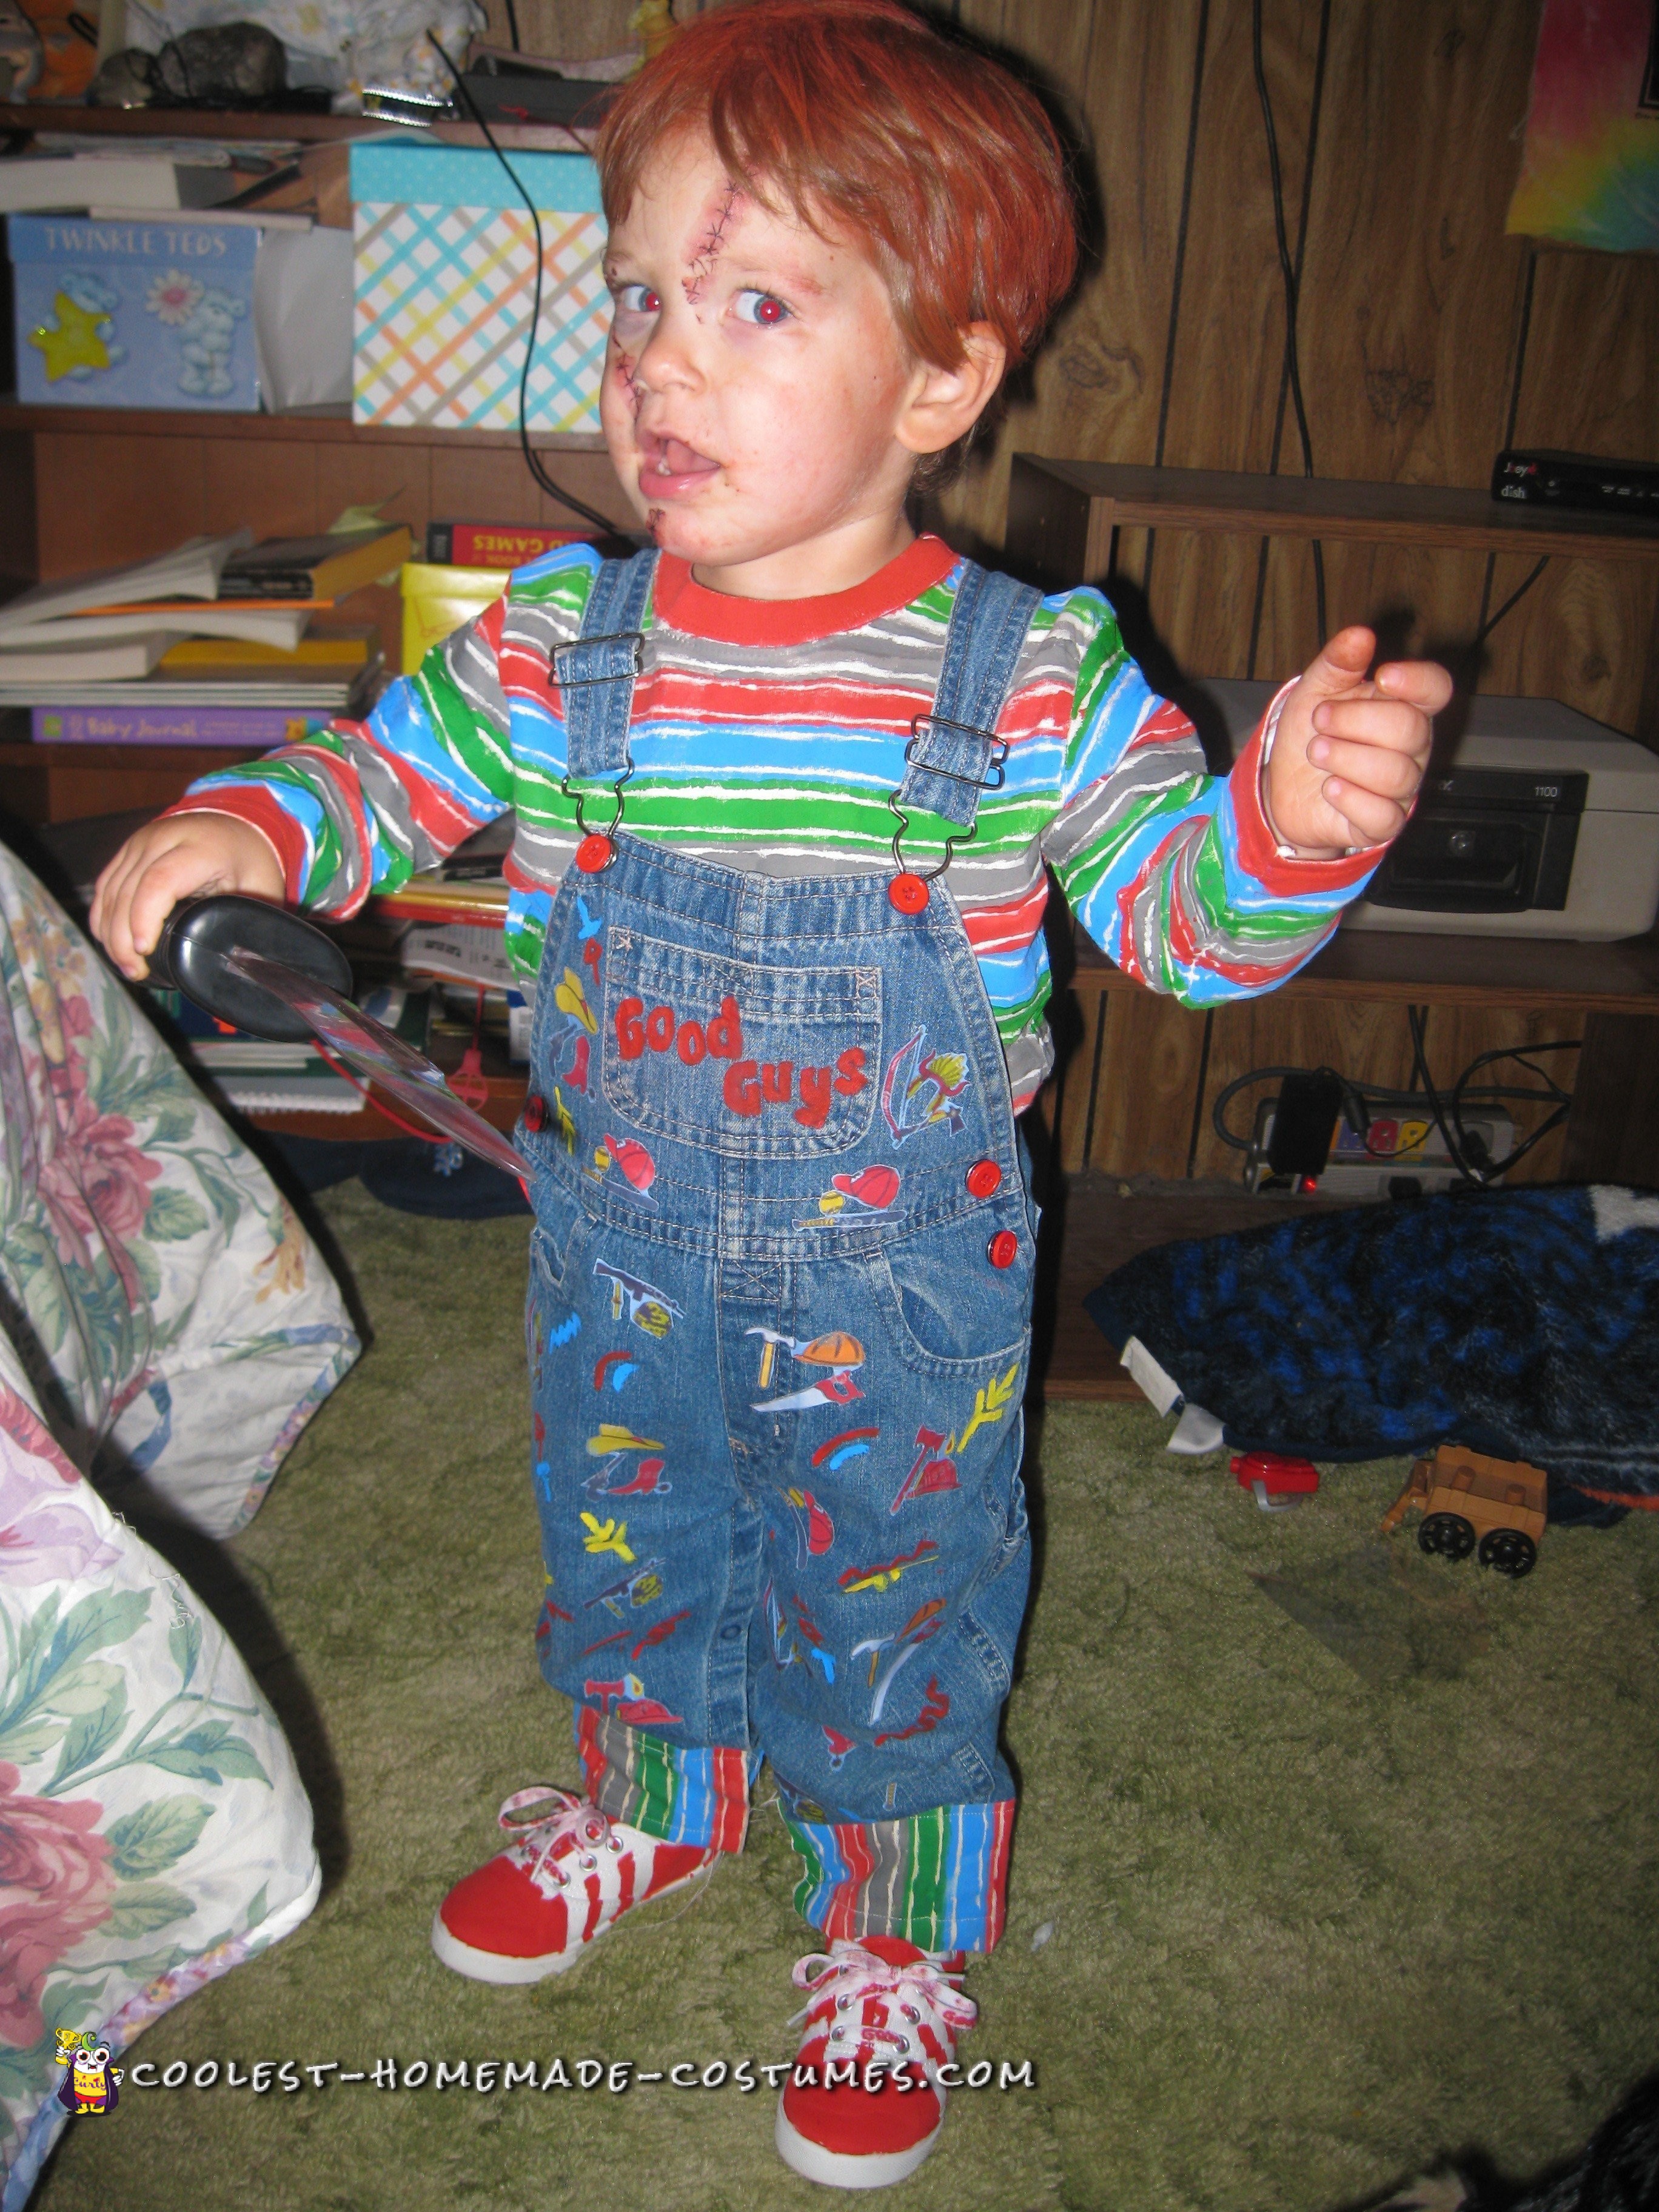 https://www.coolest-homemade-costumes.com/files/2015/11/awsome-chucky-costume-for-2-year-old-boy-145728.jpg